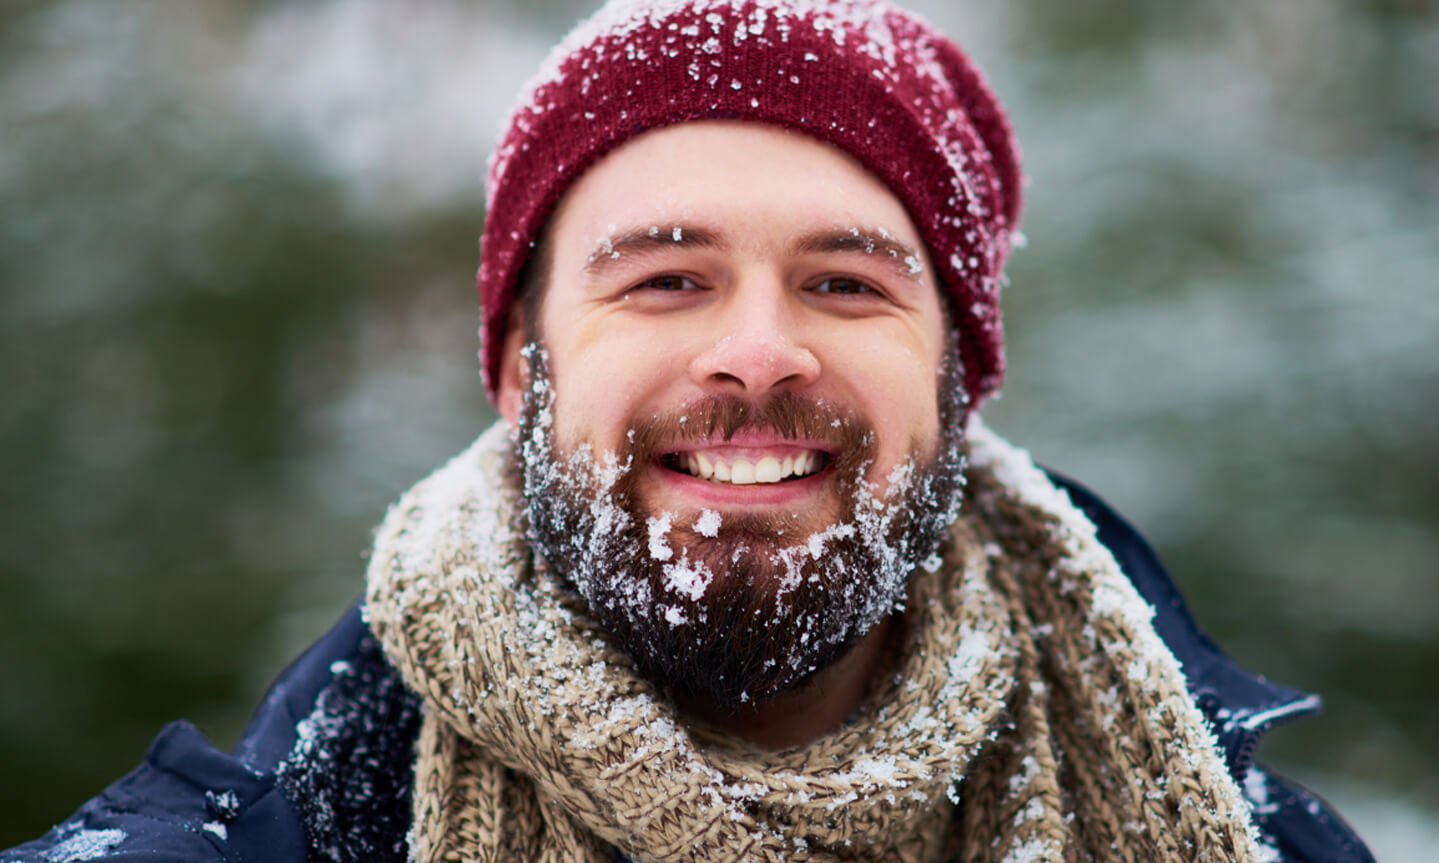 Winter can leave your beard feeling lifeless - here's a few tips to keep  winter woes at bay